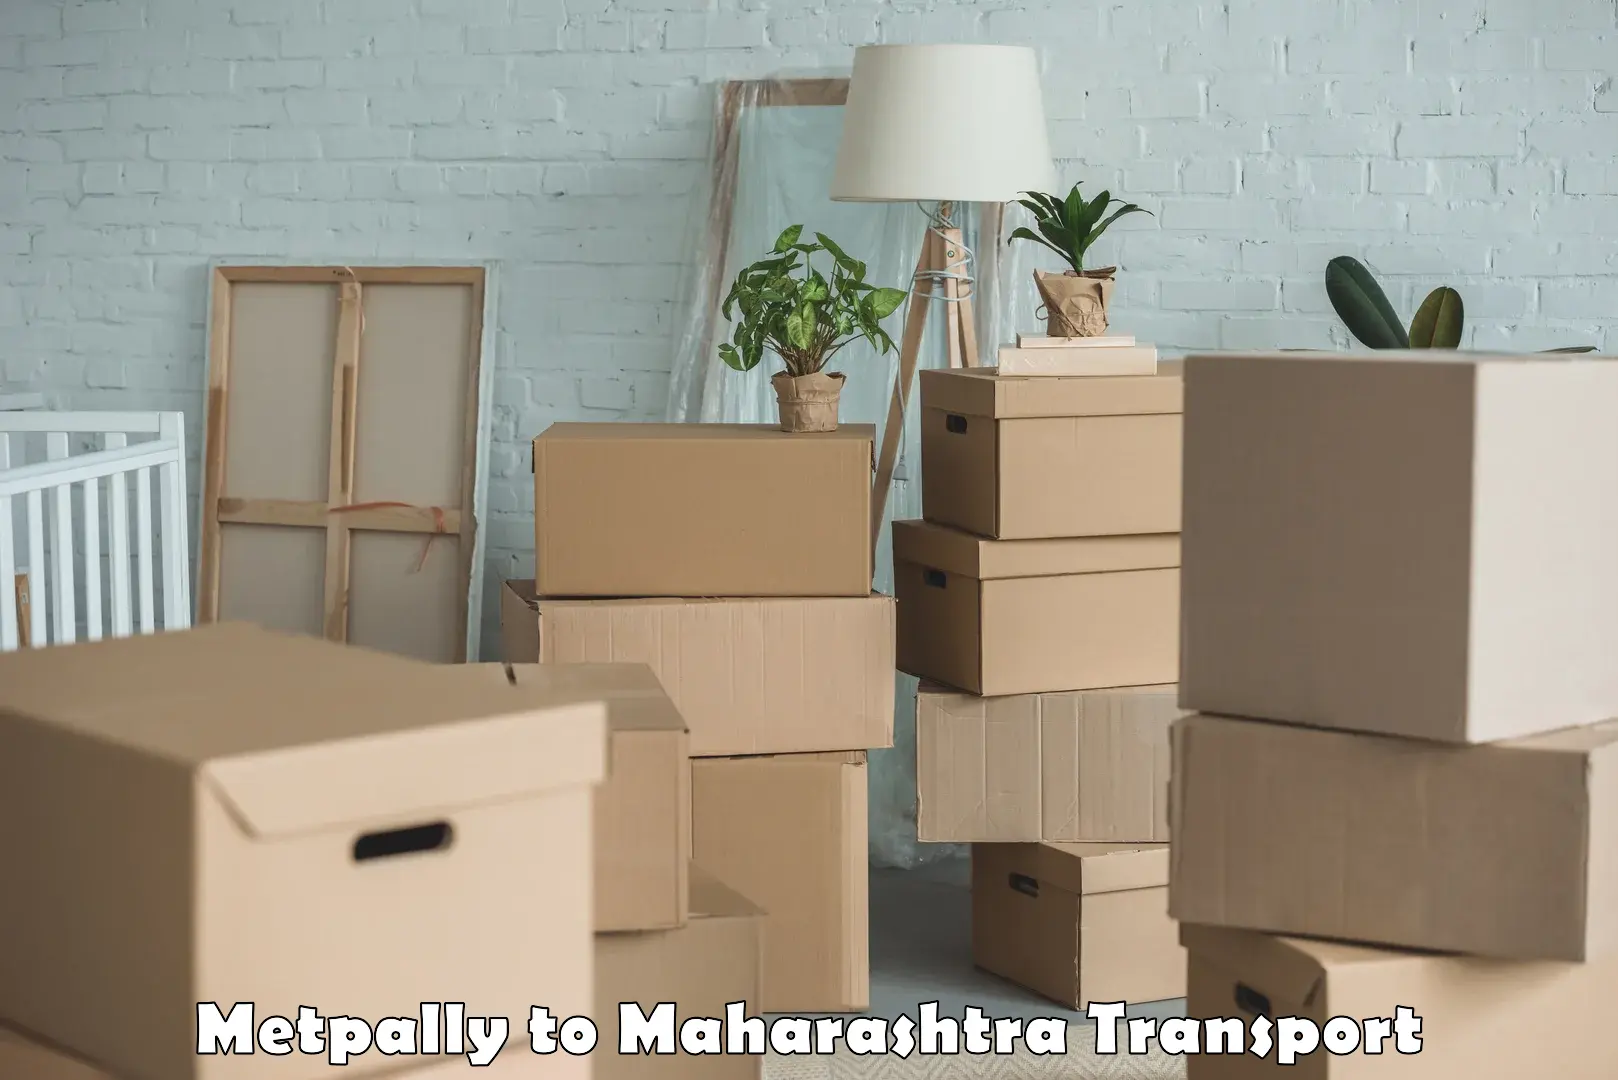 Air freight transport services in Metpally to Gadchiroli